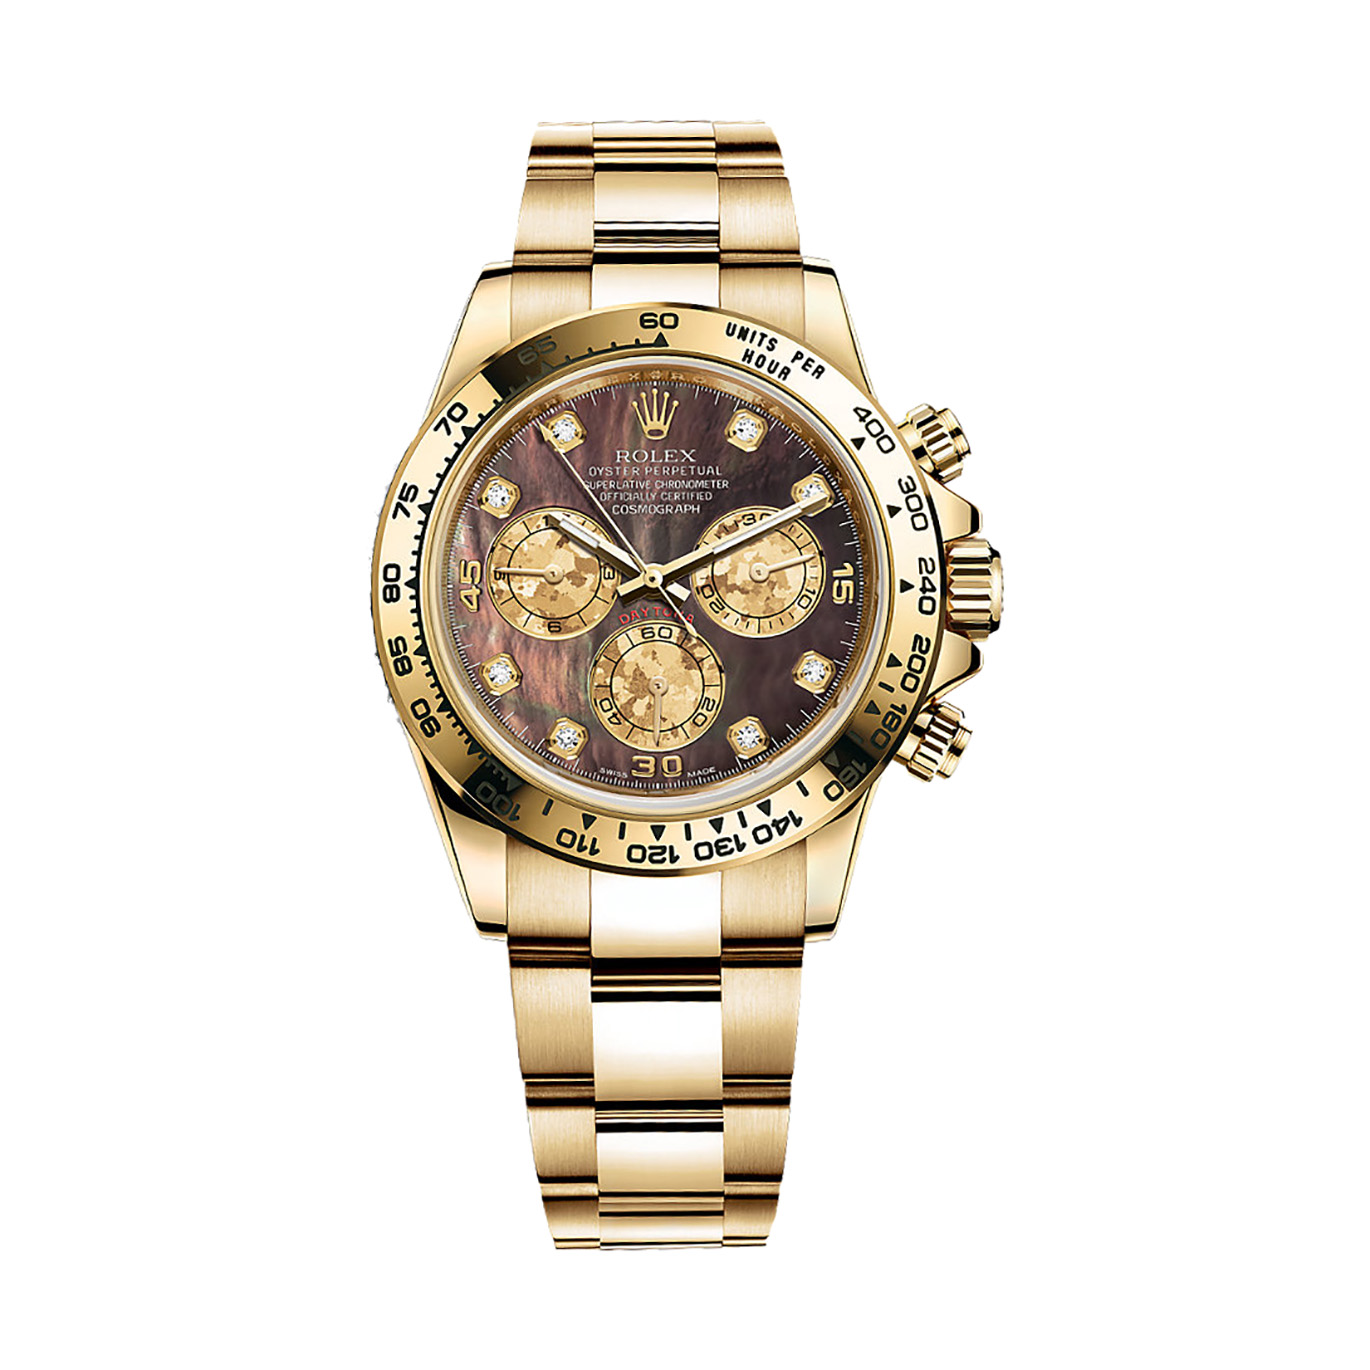 Cosmograph Daytona 116508 Gold Watch (Black Mother-Of-Pearl Set With Diamonds)